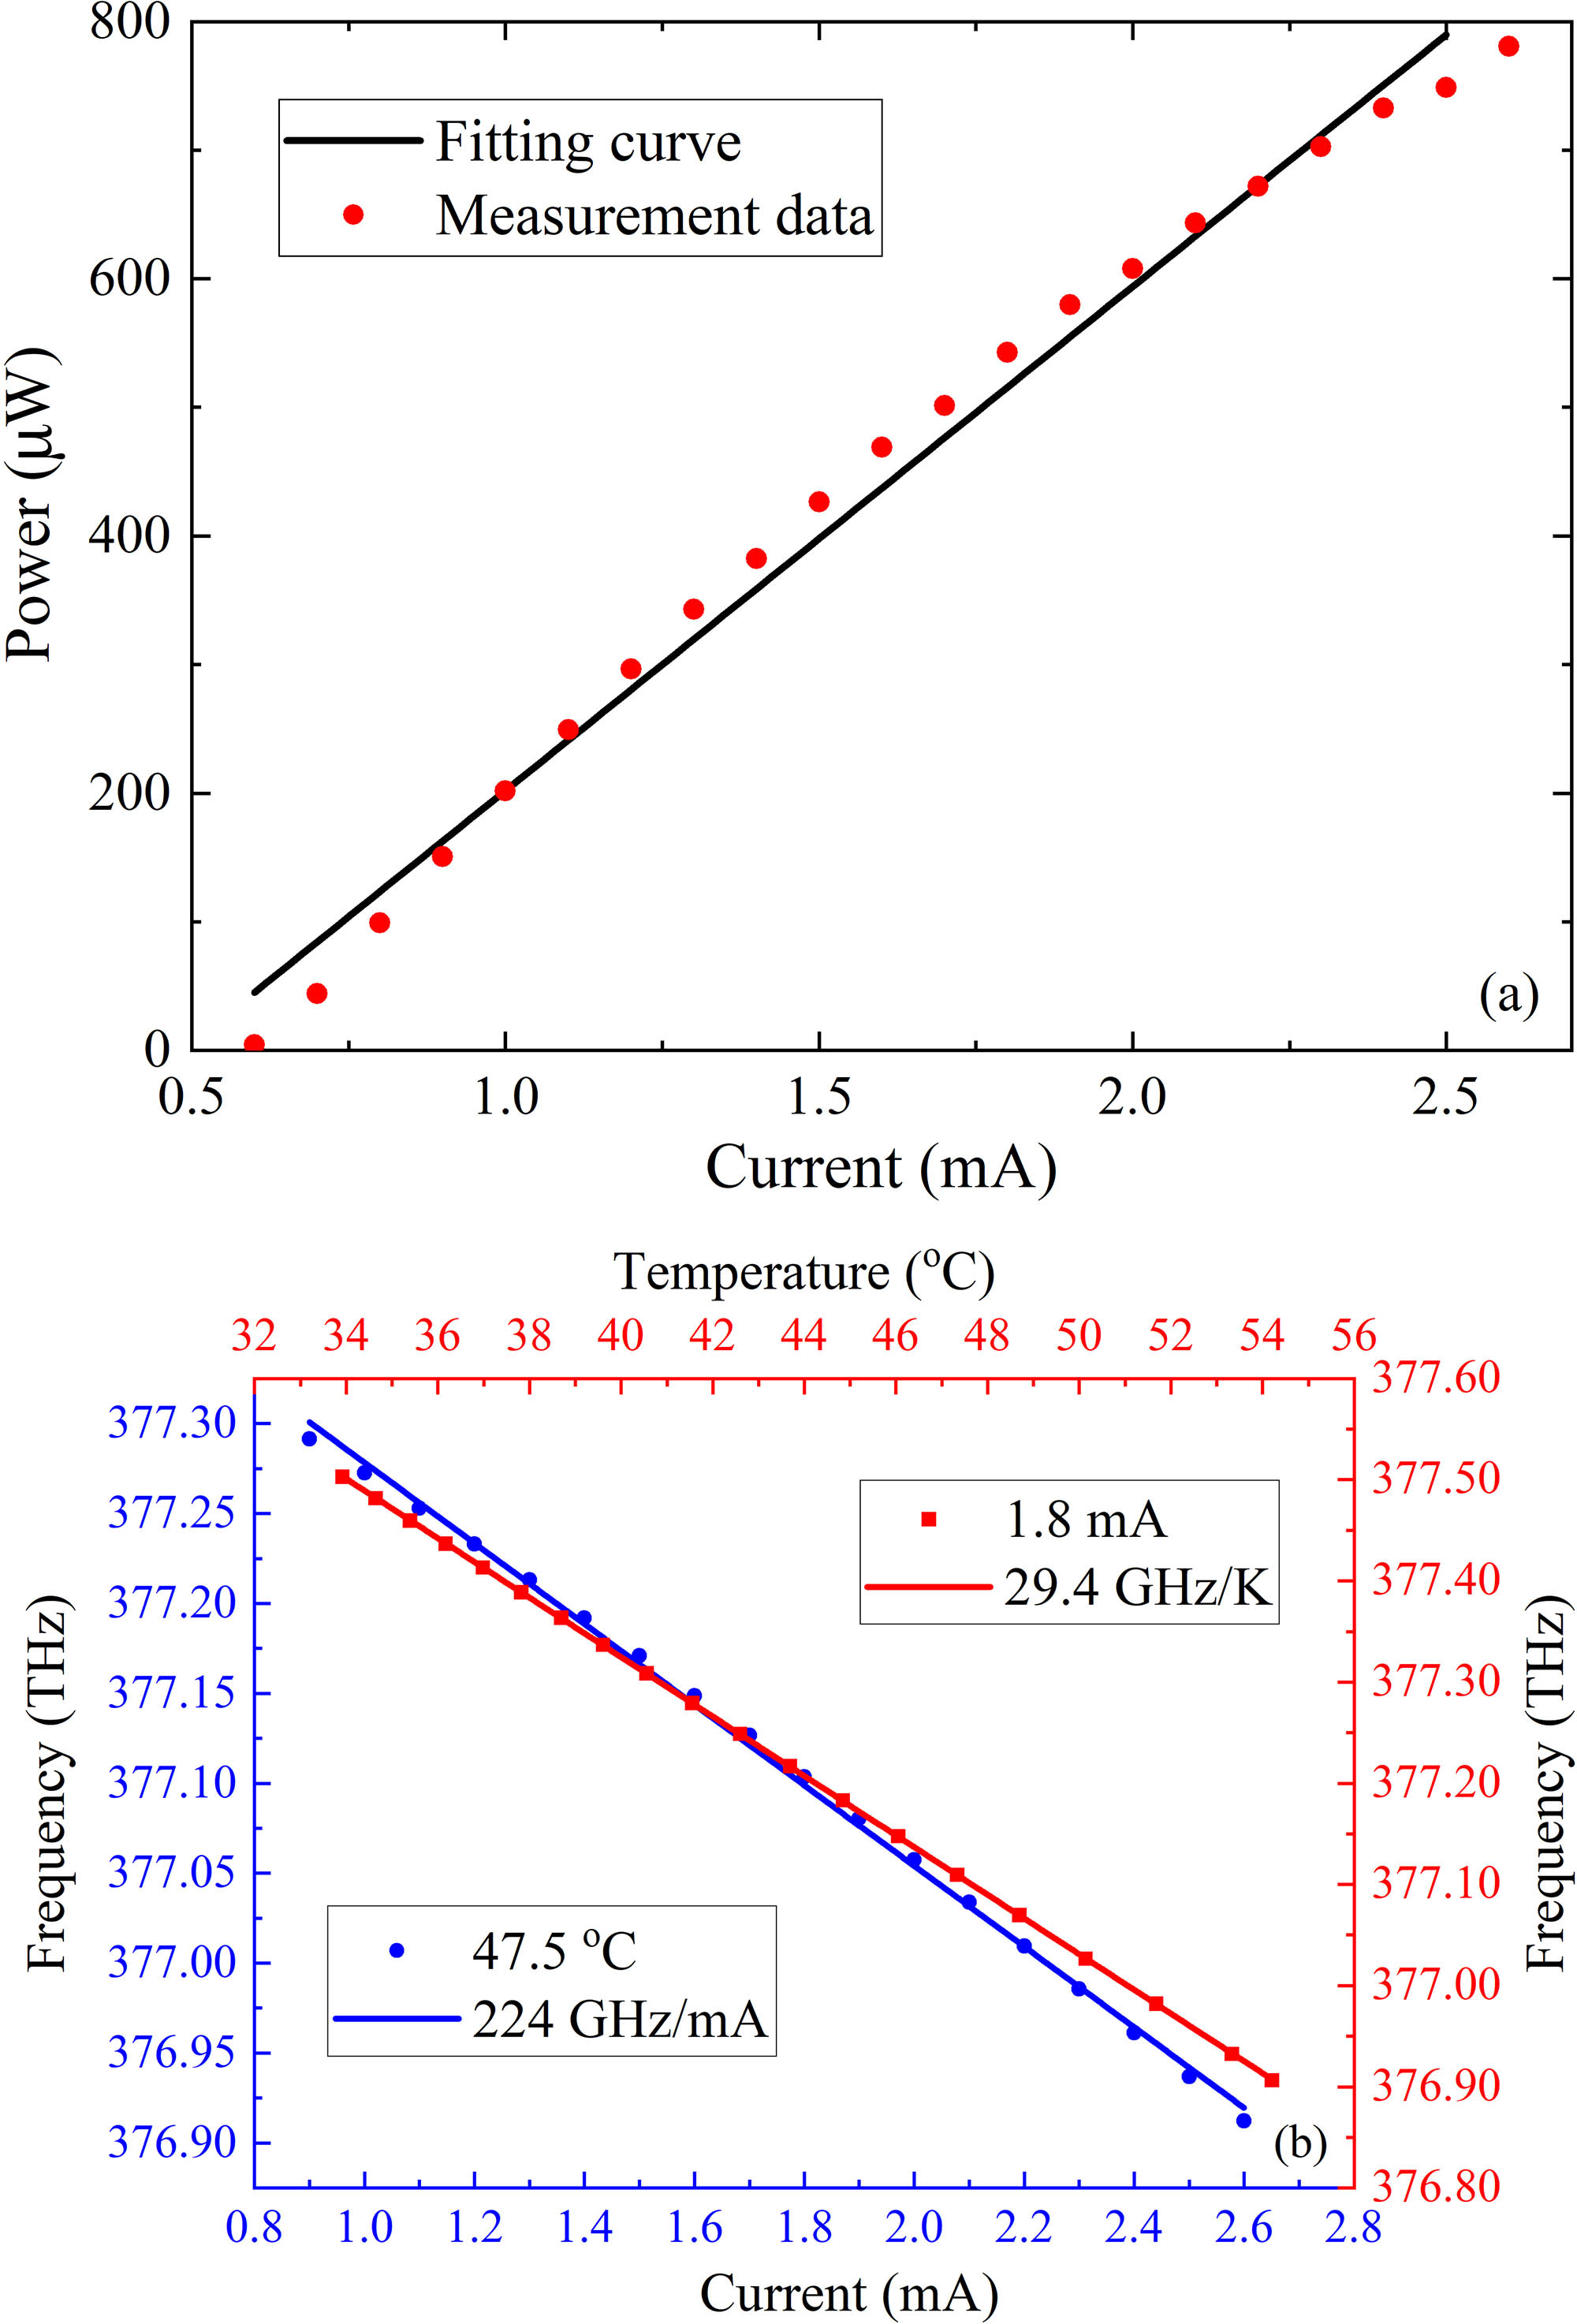 VCSEL properties. (a) Intensity tuning of the VCSEL can be obtained by changing the injection current. The injection current tuning coefficient is 391.9 µW/mA. (b) The tuning coefficient is 224 GHz/mA at 47.5°C and 29.4 GHz/K at 1.8 mA.